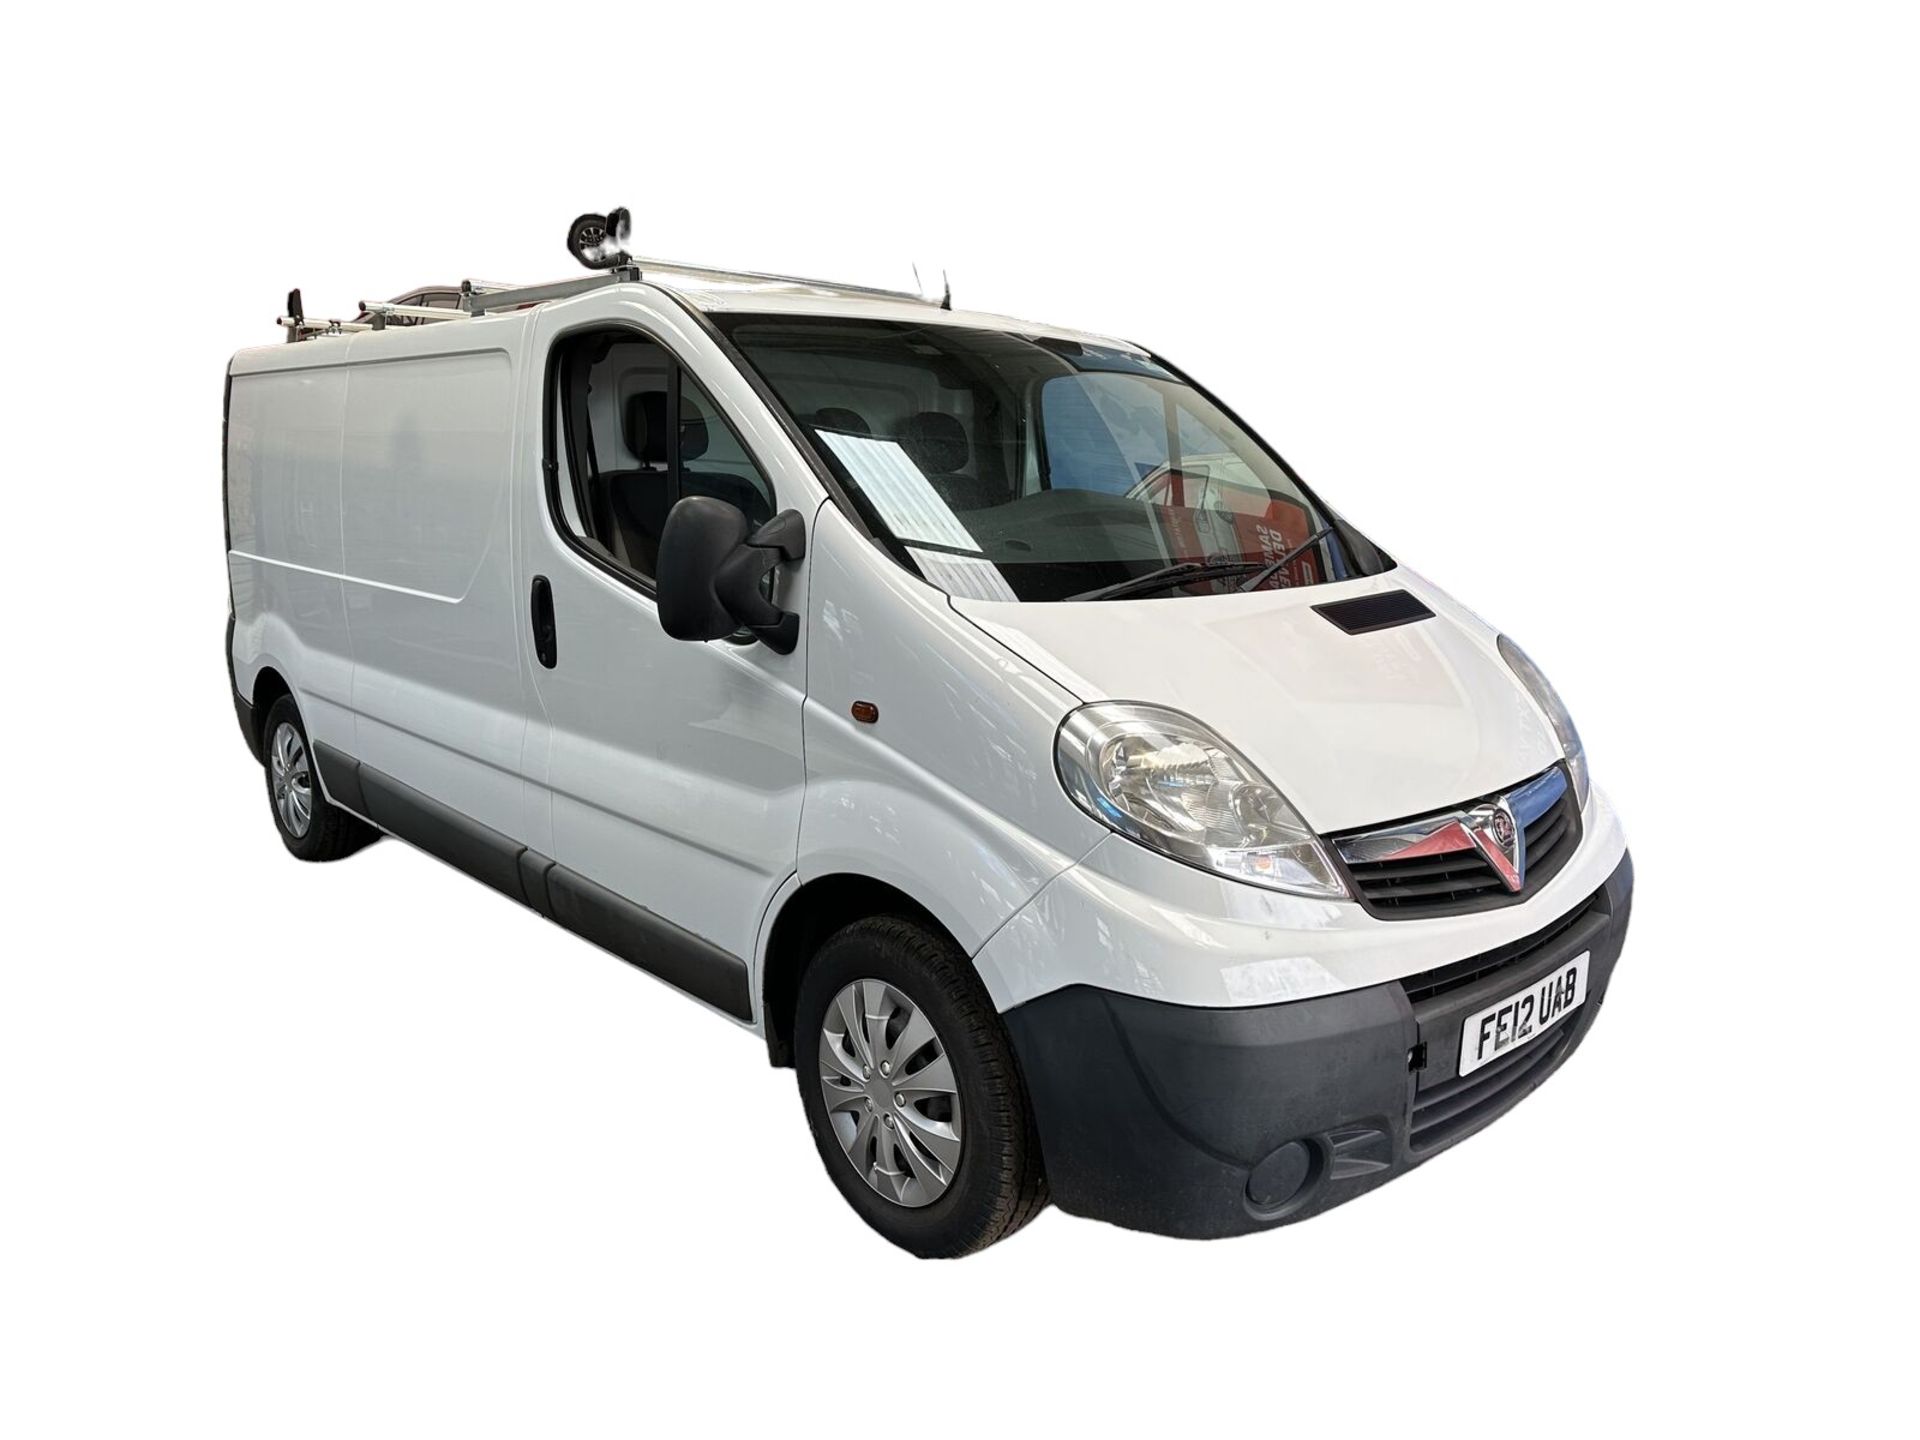 DECENT CONDITION DEAL: VAUXHALL VIVARO SPARES OR REPAIRS >>--NO VAT ON HAMMER--<<